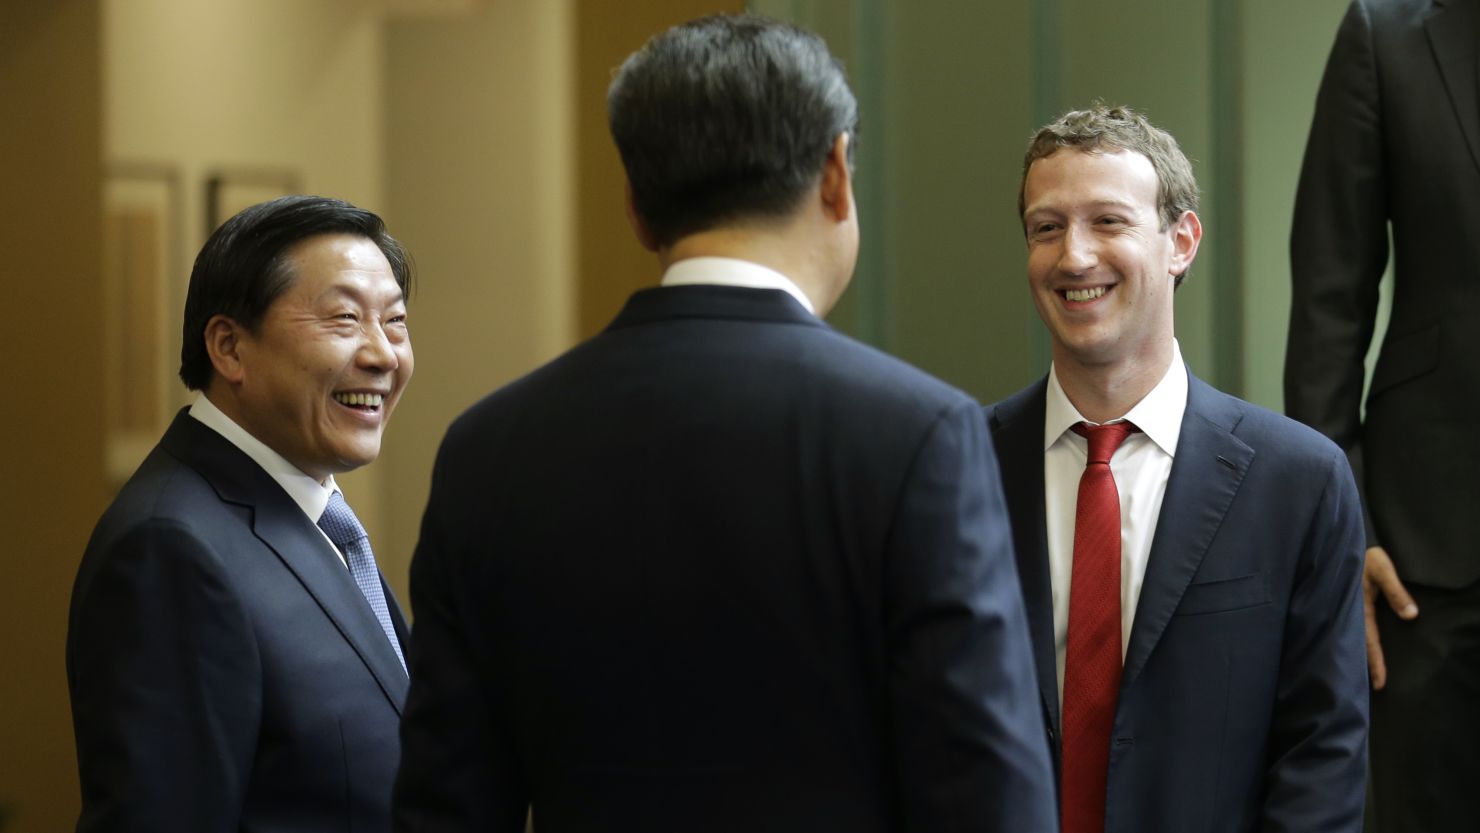 Chinese President Xi Jinping (C) talks with Facebook Chief Executive Mark Zuckerberg (R) as Lu Wei, China's then-internet czar, looks on, during a gathering of CEOs and other executives in September 2015.